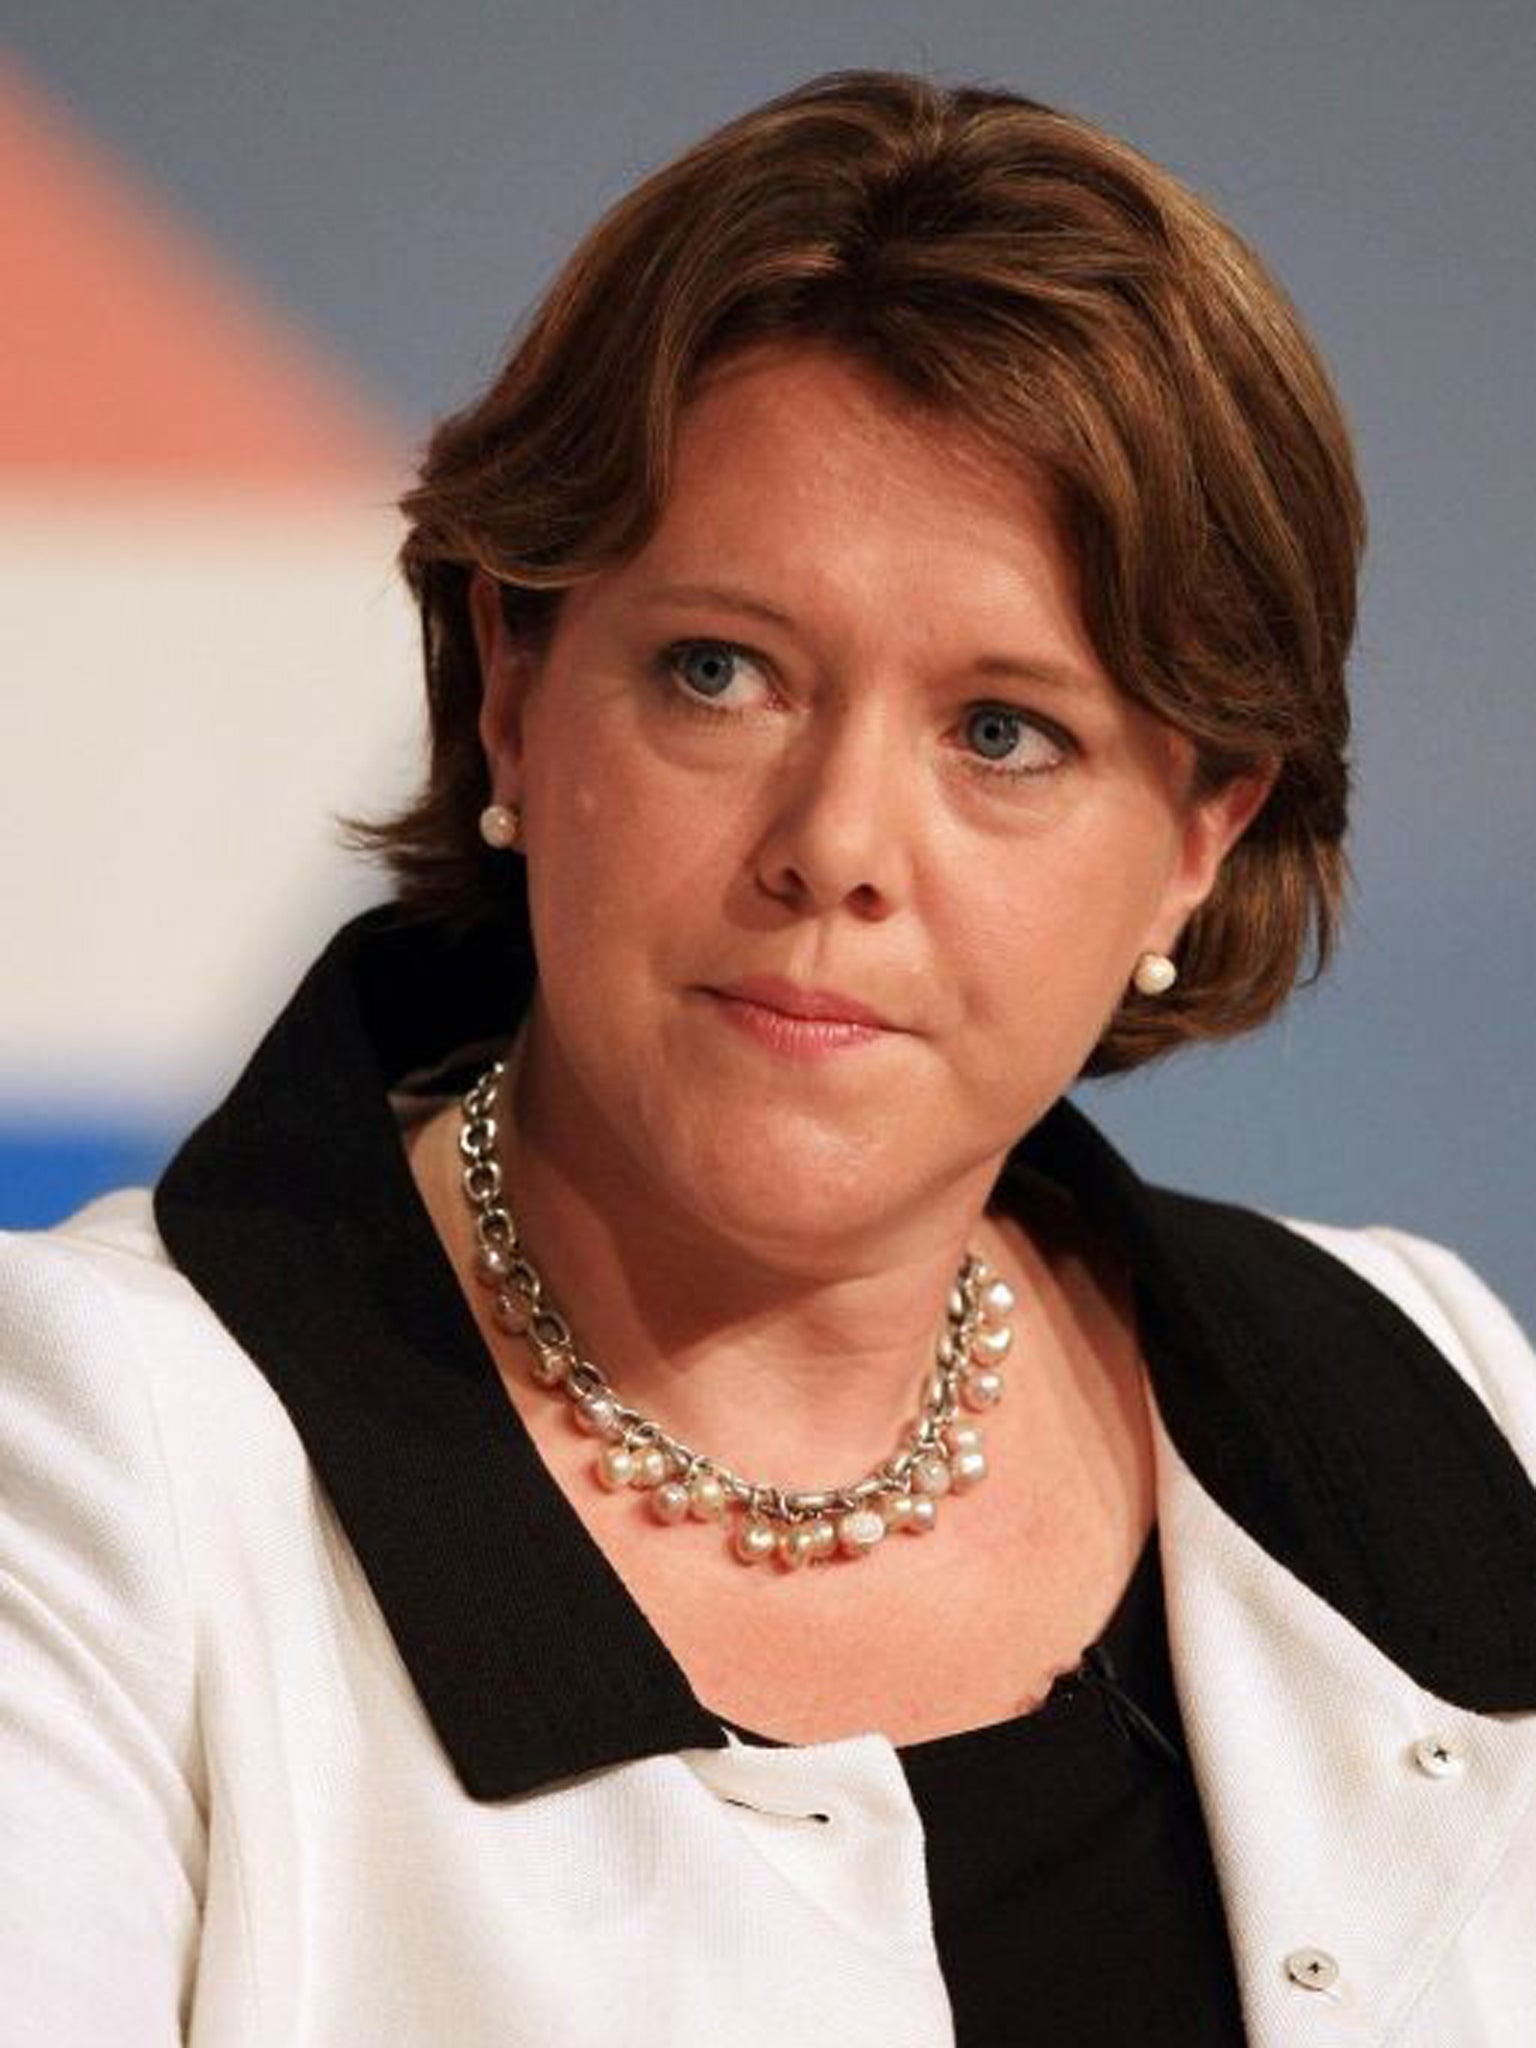 Maria Miller resigned this morning